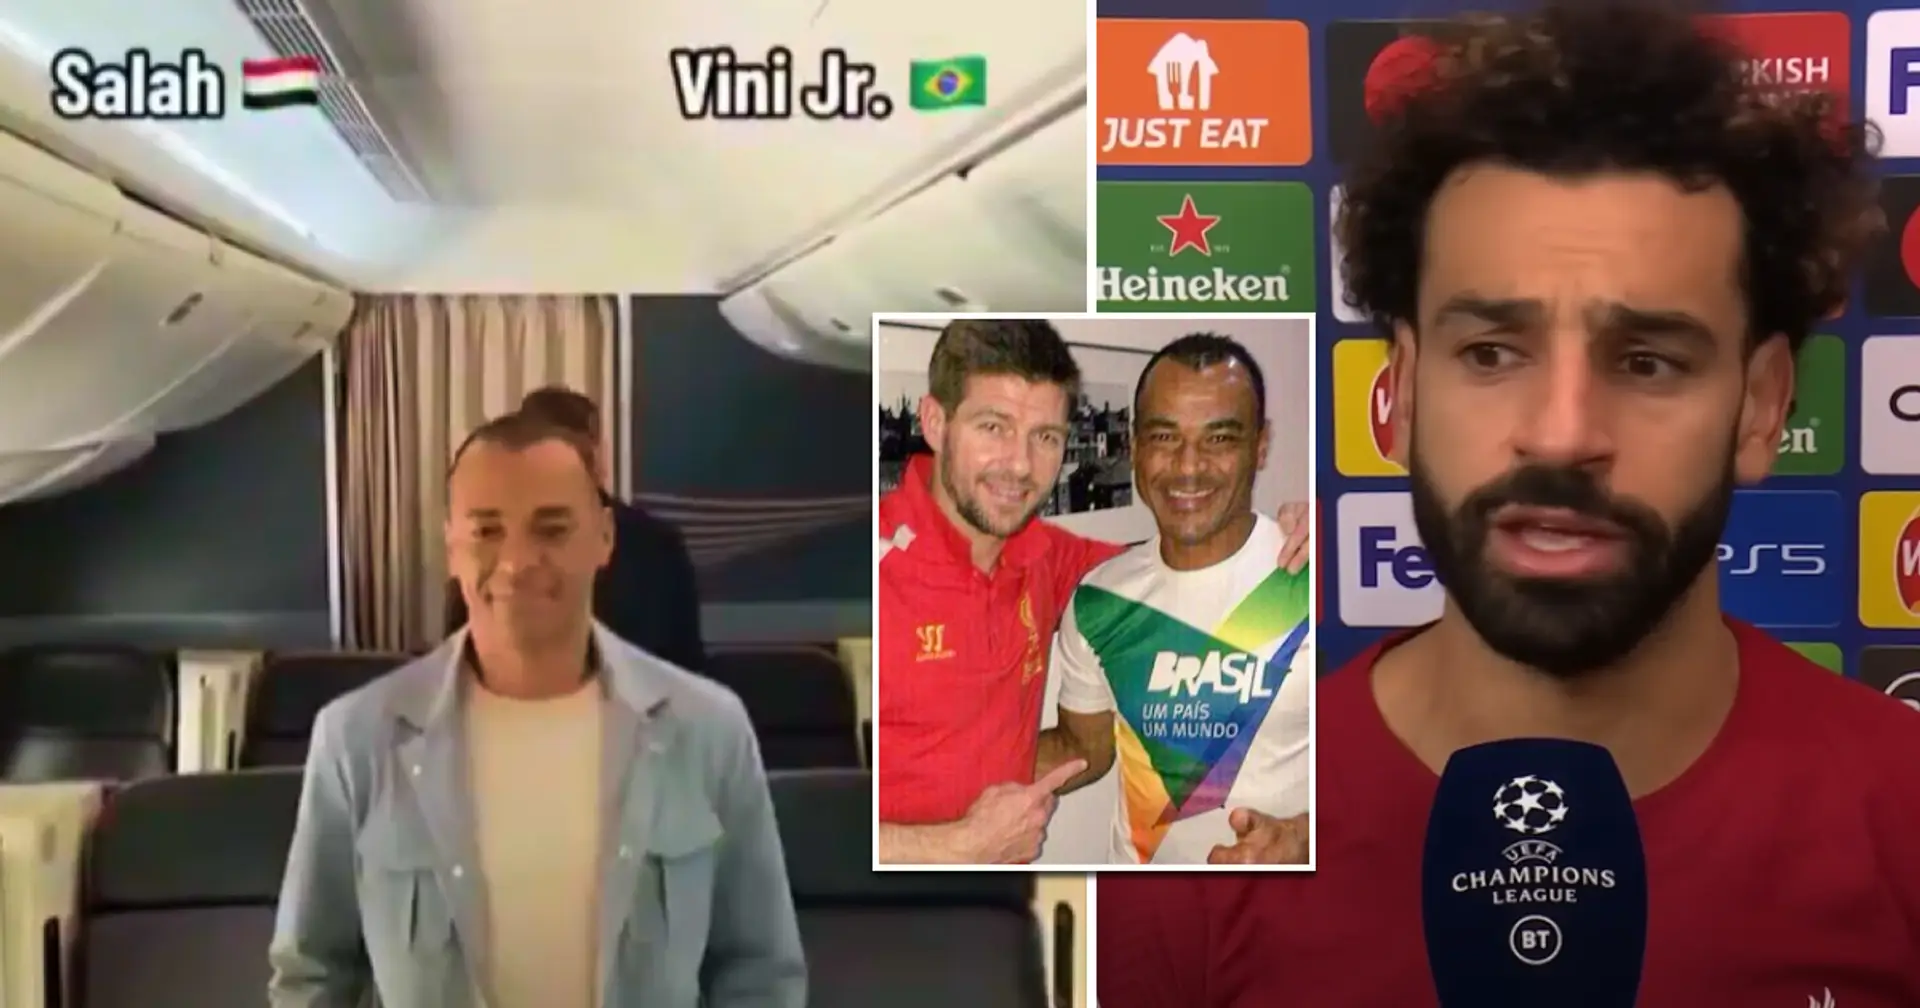 Cafu and Gerrard pick best footballer out of two football superstars — agree on Mo Salah vs Vinicius